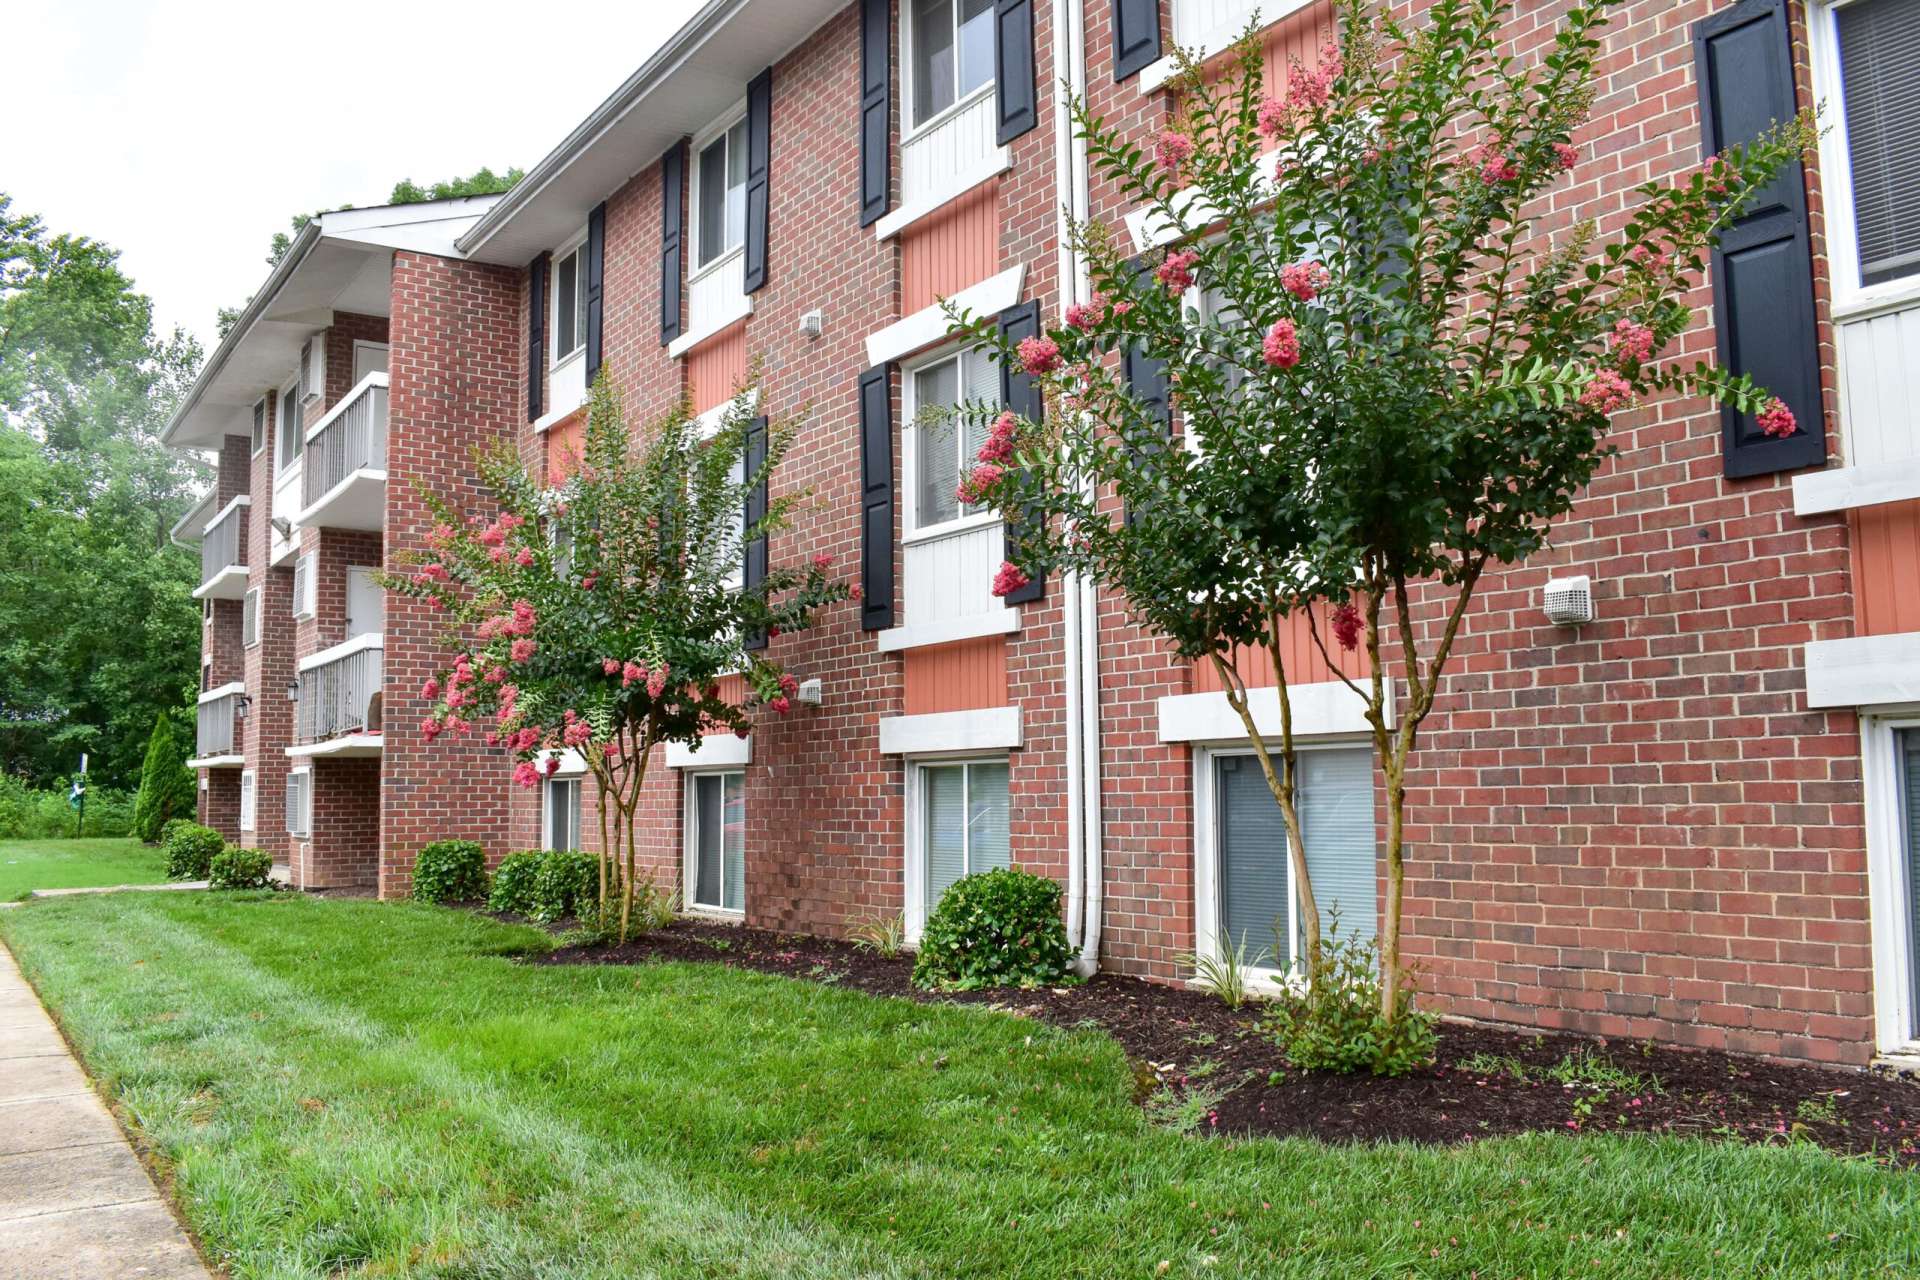 The exterior of an apartment building at Chesapeake Village apartments, fitted with a lawn, and flowers